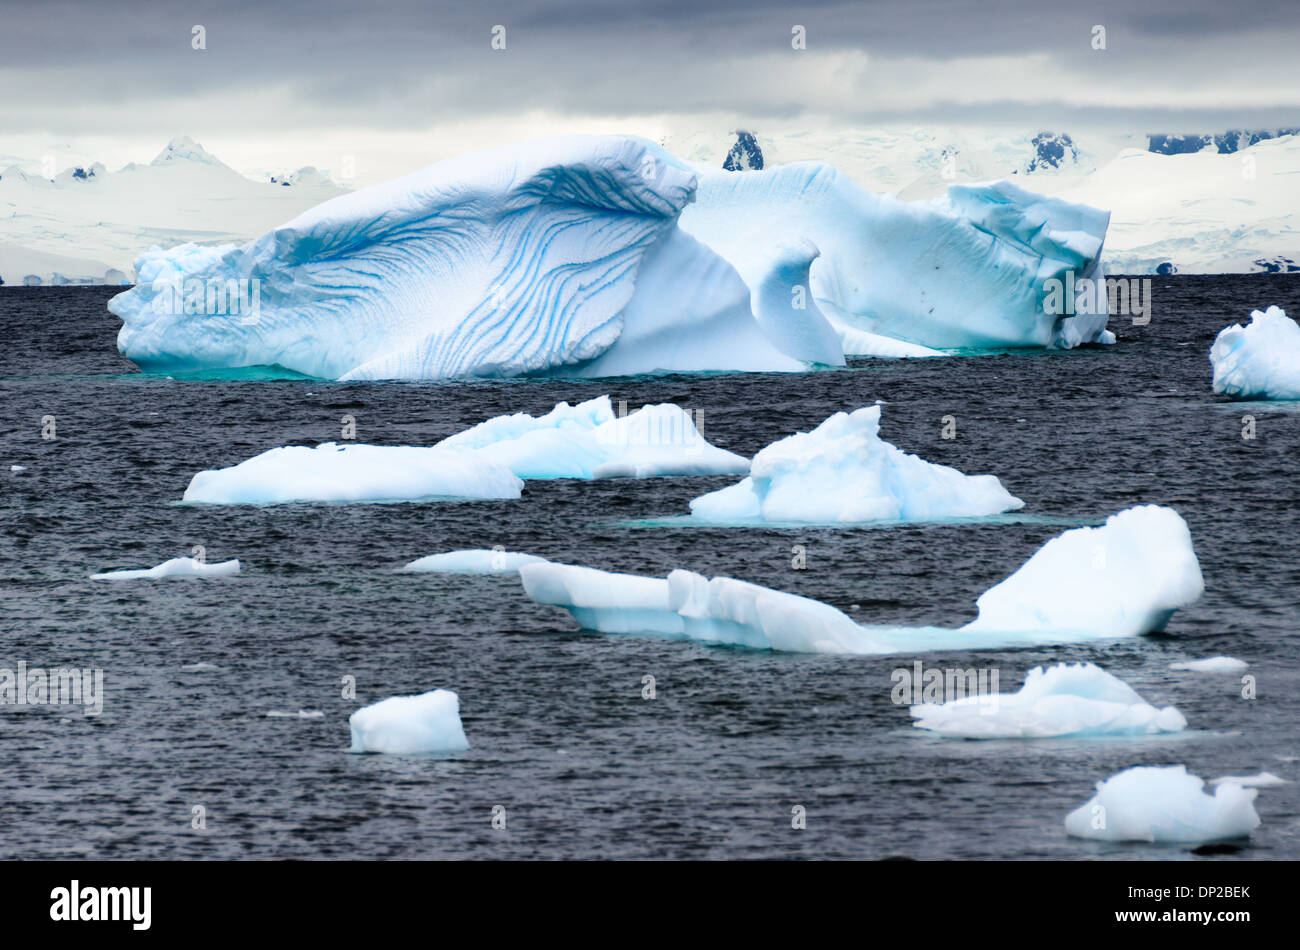 ANTARCTICA - A series of small and medium-sized bue icebergs float in ...